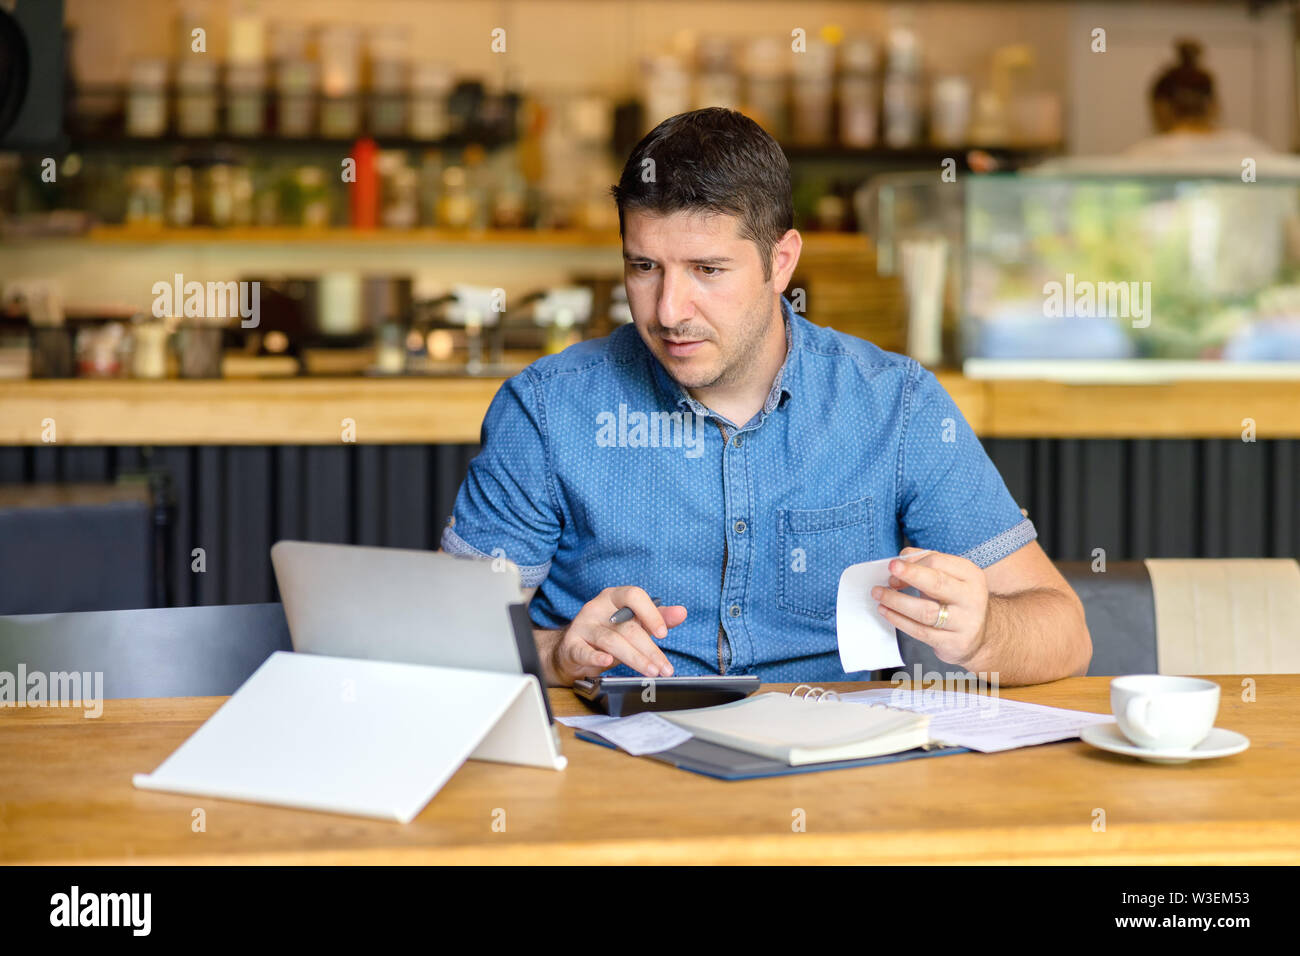 Mature business owner using digital tablet calculating profit of new business Stock Photo